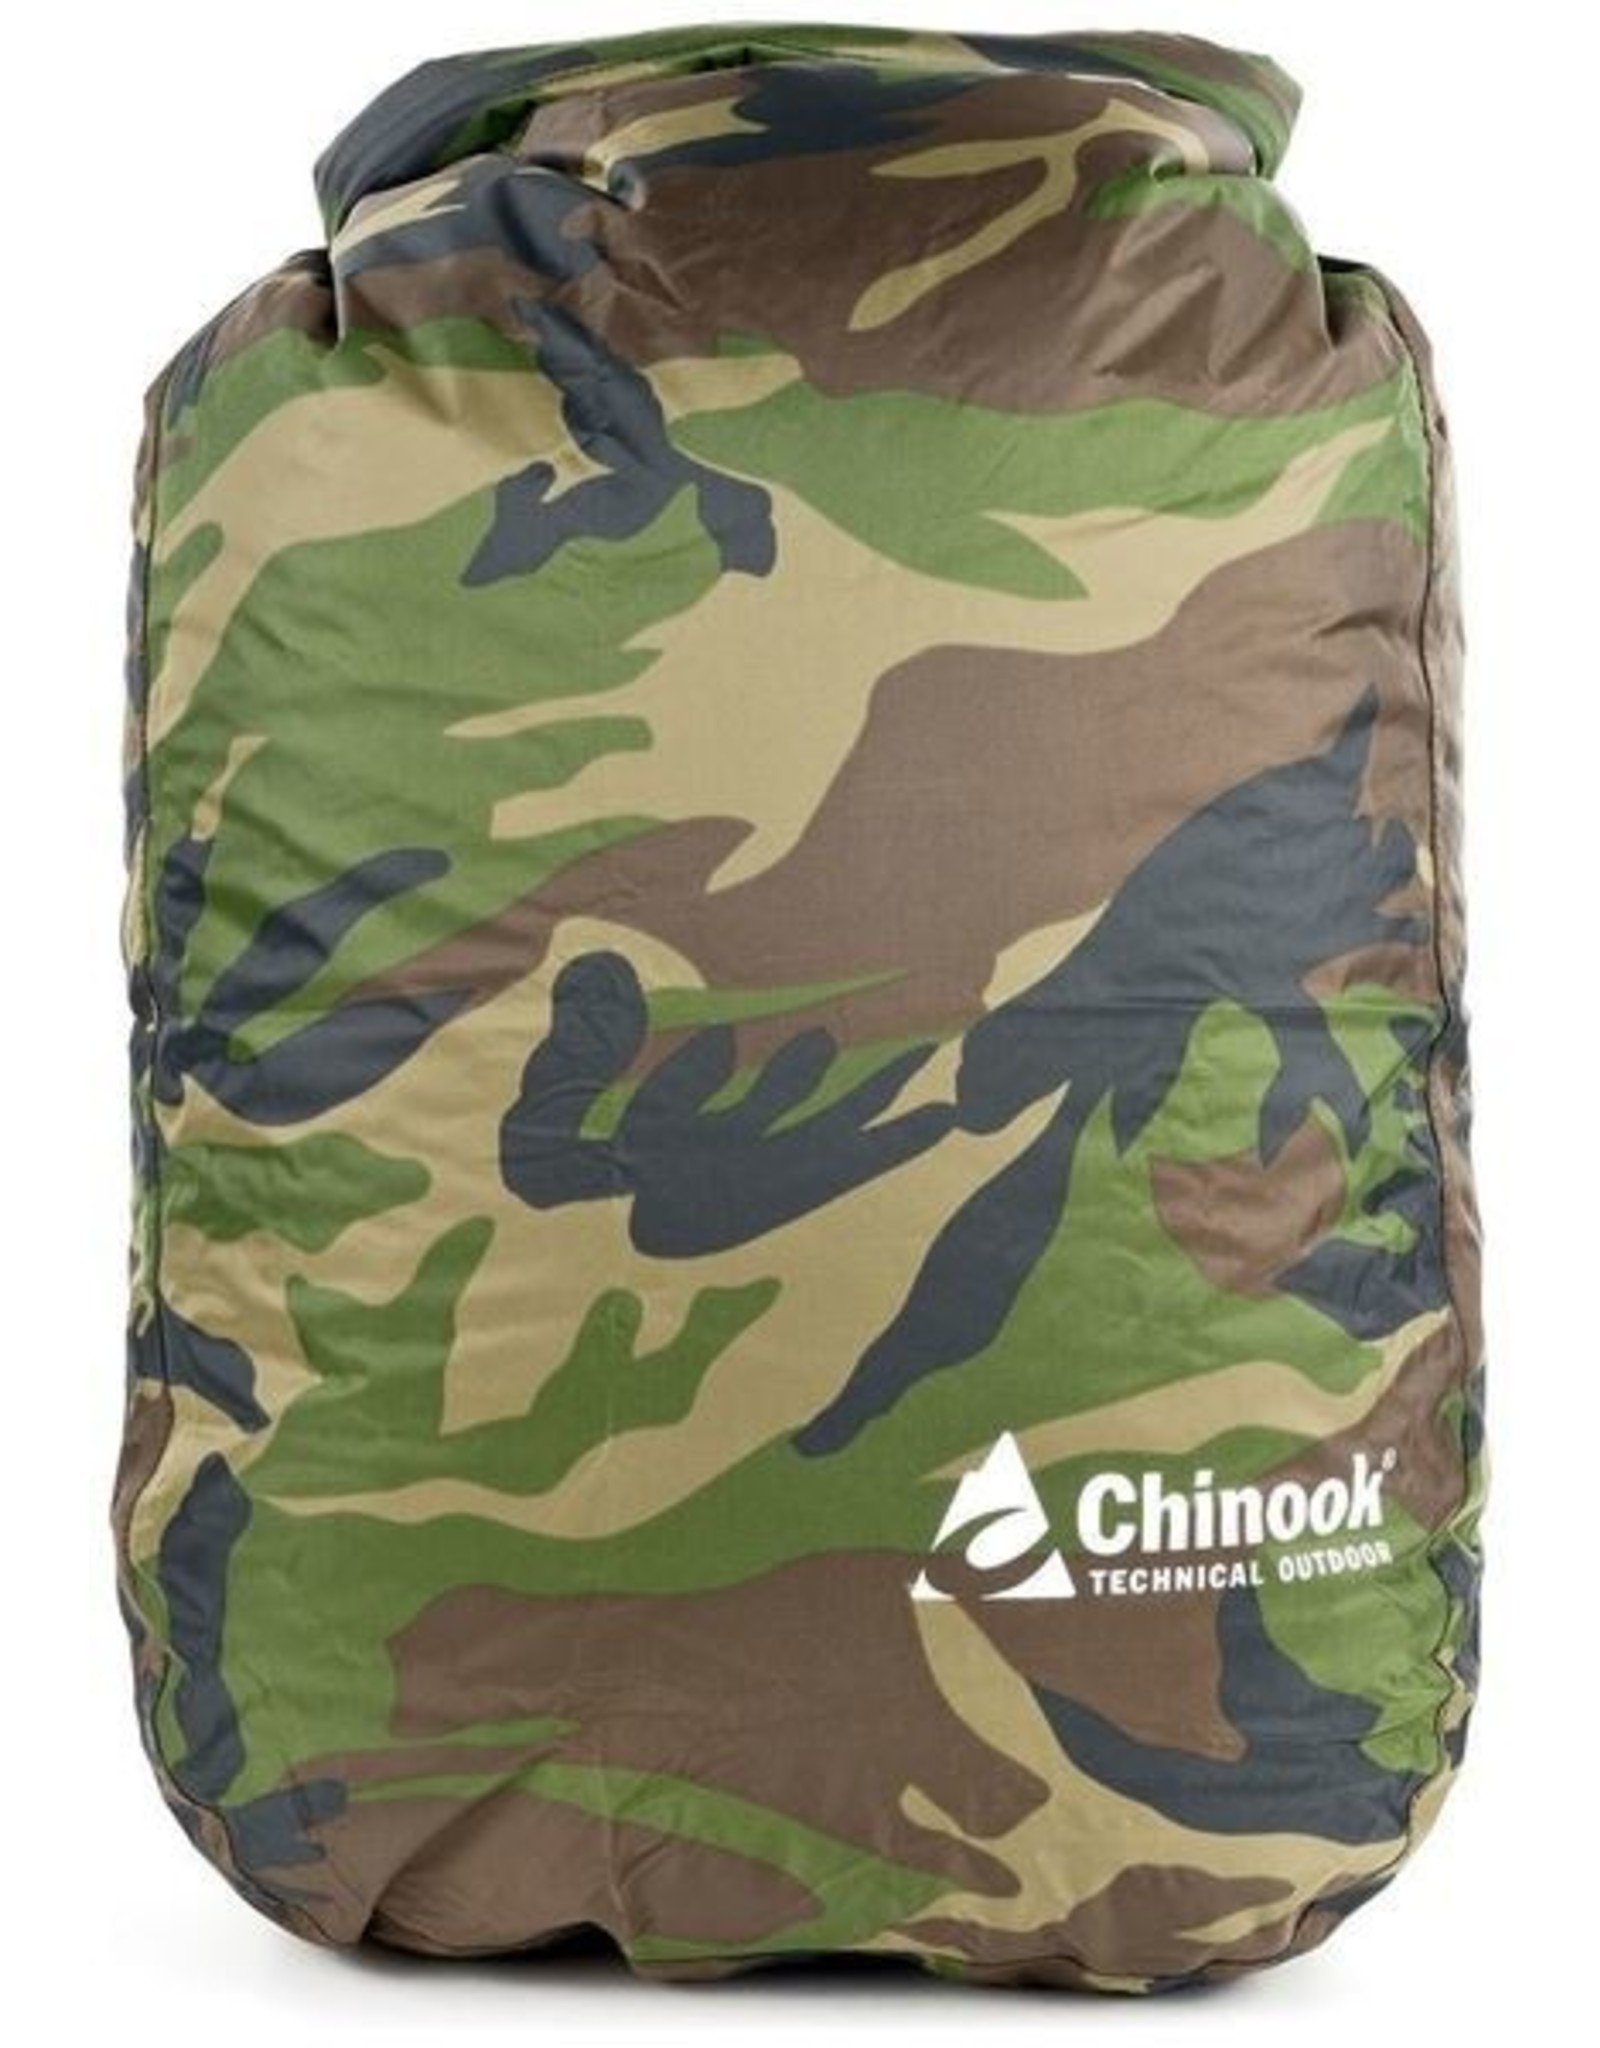 CHINOOK TECHNICAL OUTDOOR CHINOOK - AQUALITE WATERPROOF DRY-BAG, 45 LITRES, CAMO